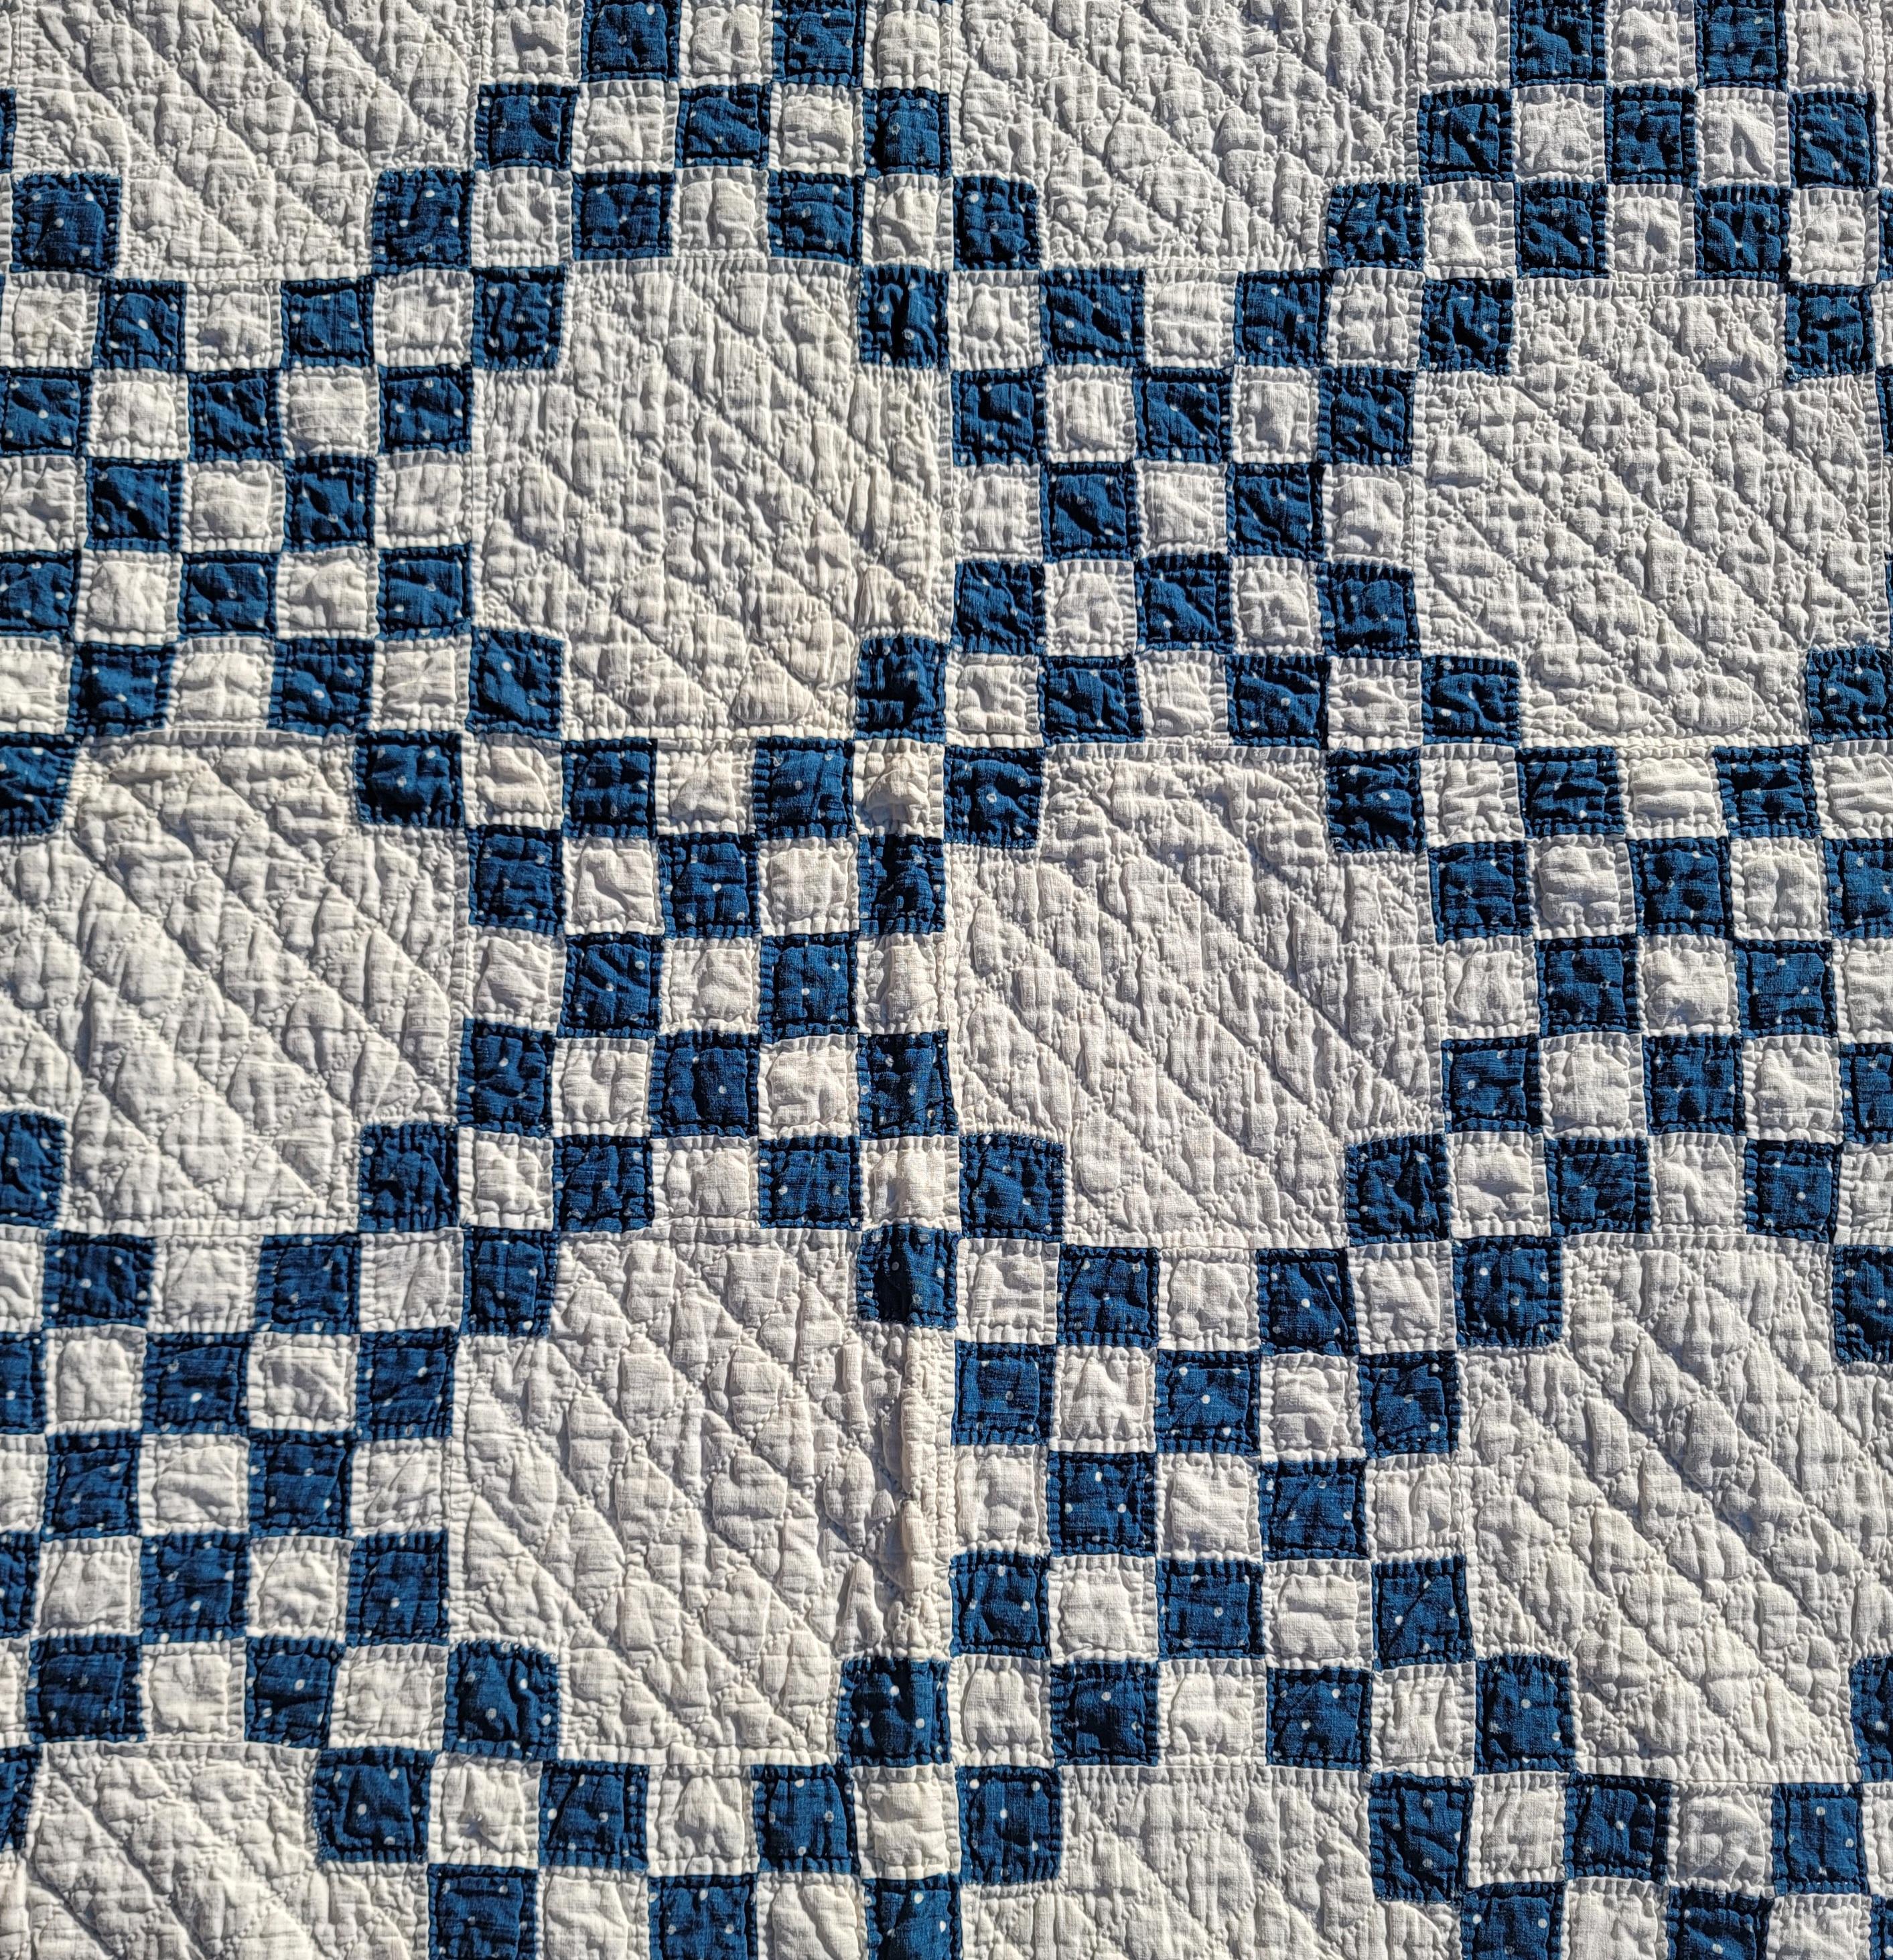 American 19thc Mini Pieced Blue & WhiteChain Postage Stamp Quilt For Sale